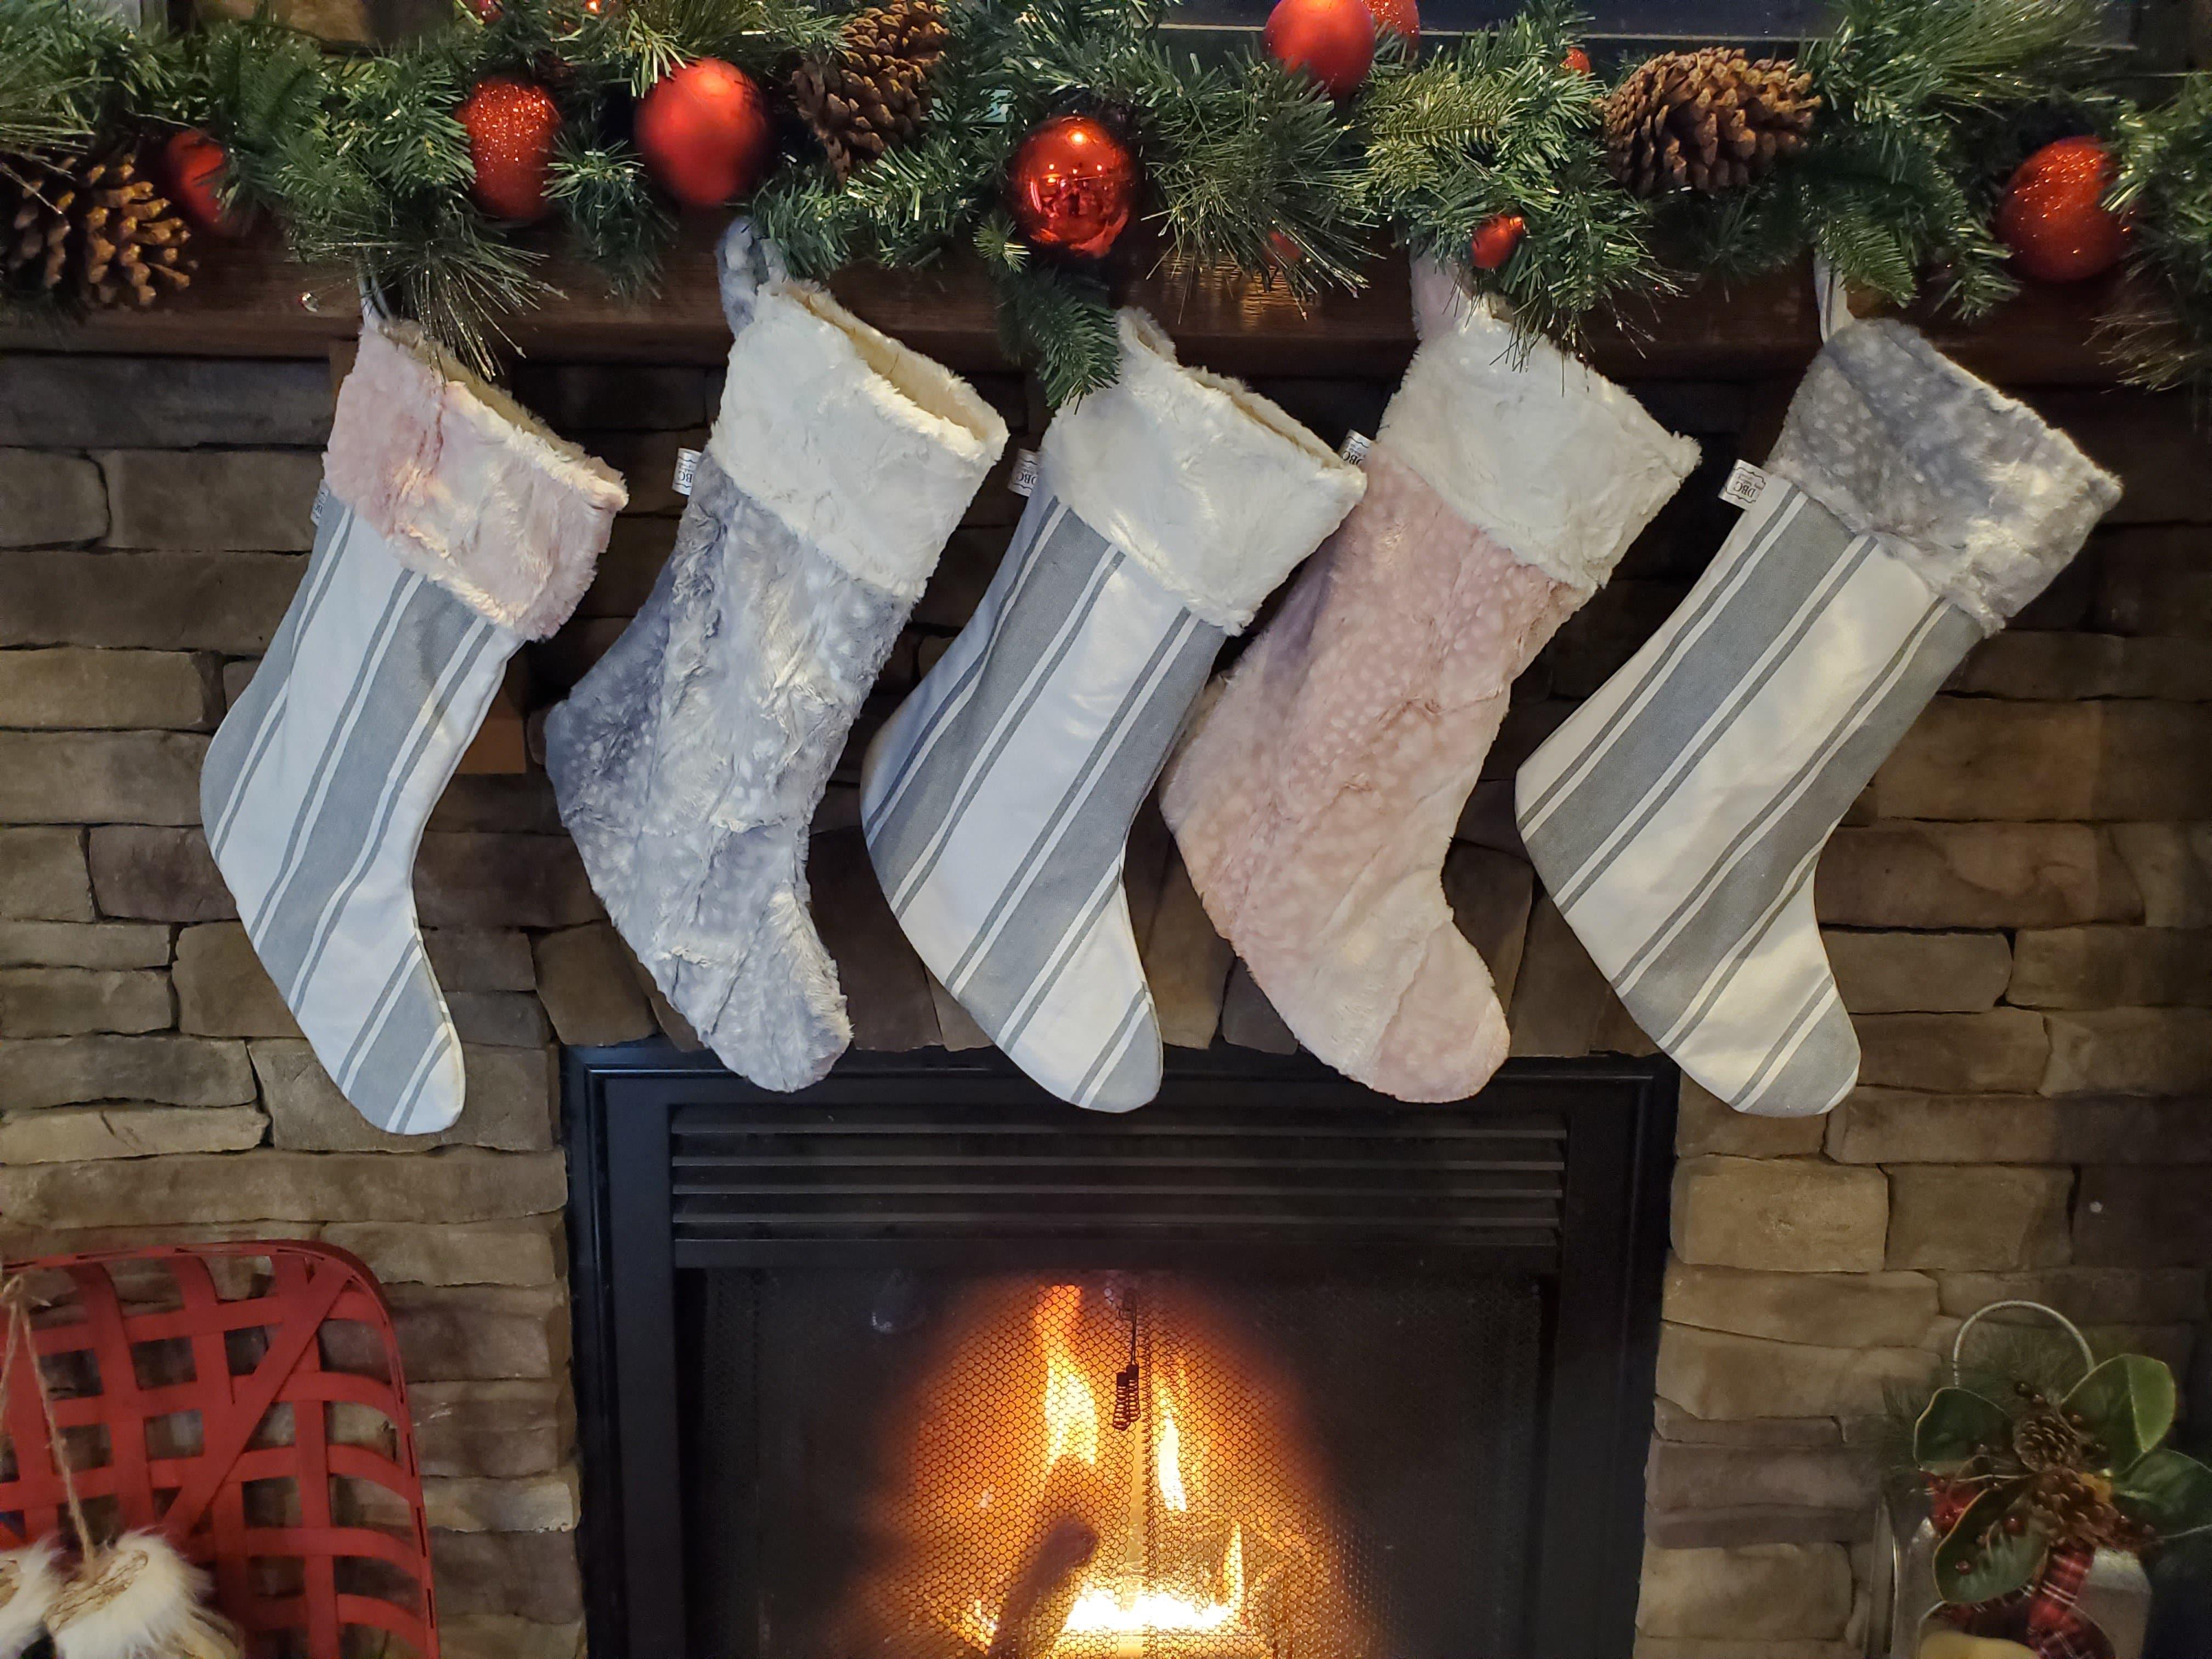 Holiday Decor - Christmas Stocking - Farm Stripe in Gray, Rosewater Fawn Minky, Silver Fawn Minky